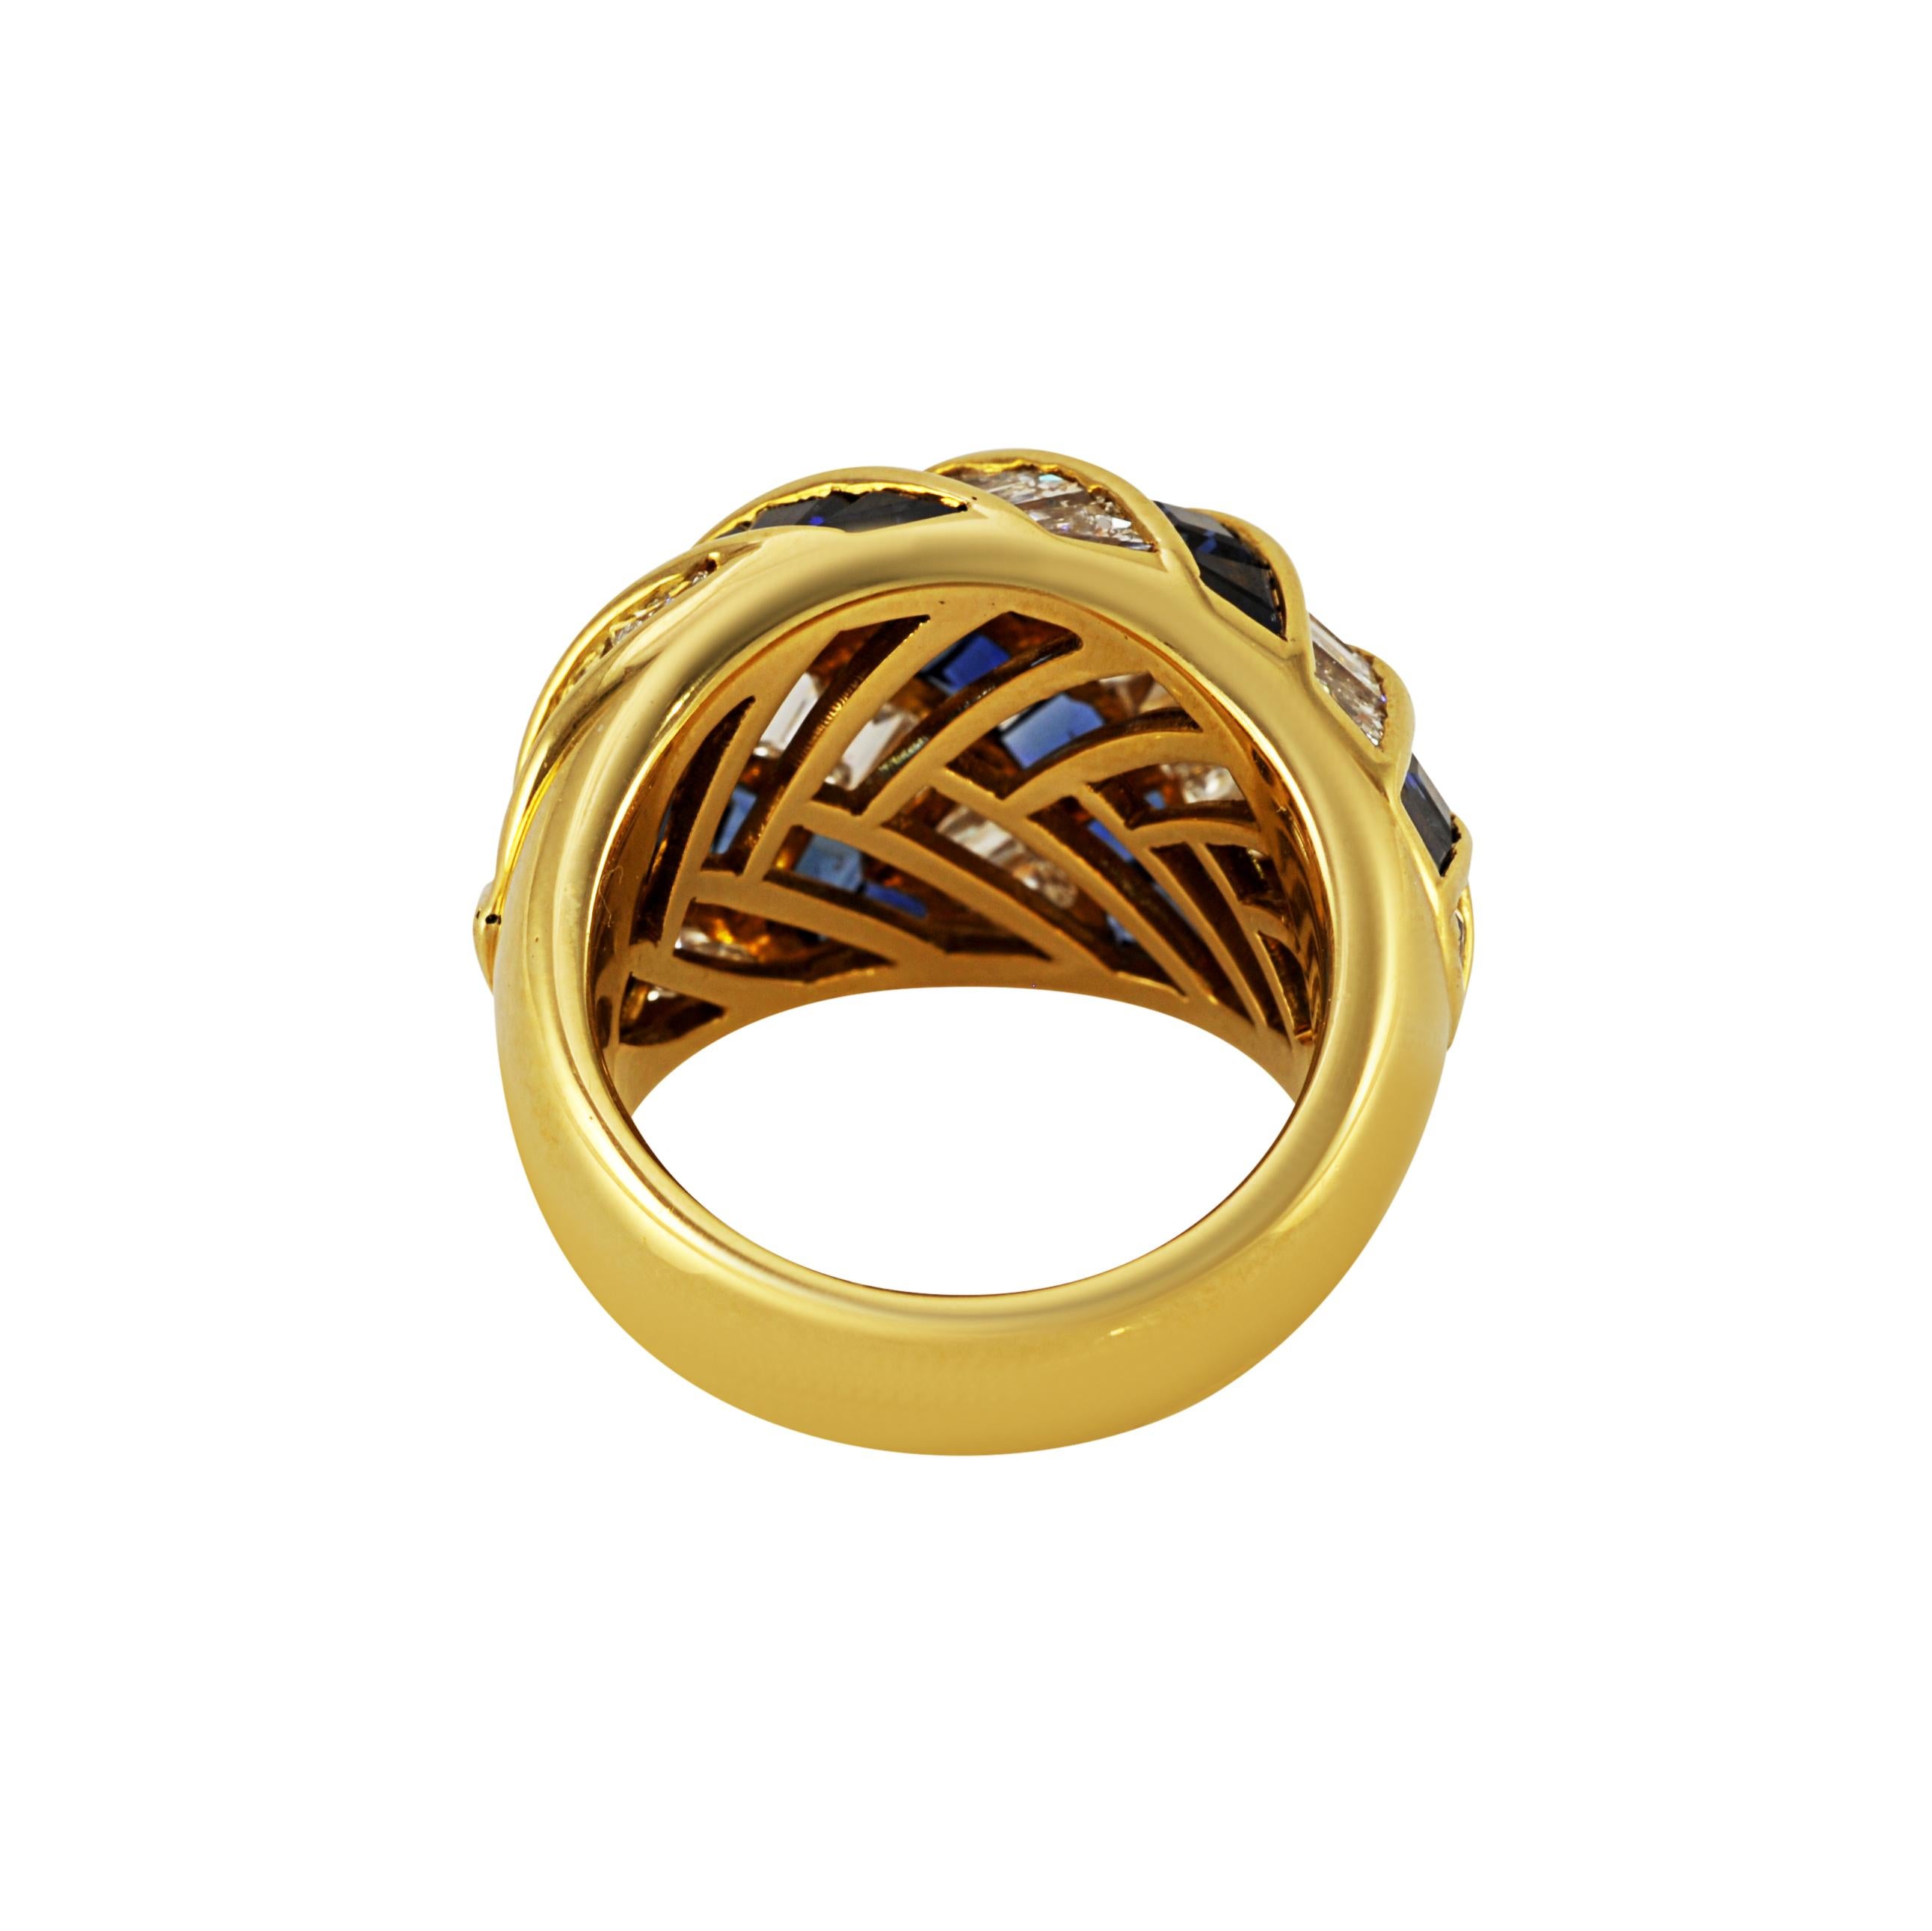 Contemporary Picchiotti 18K Yellow Gold Baguette Diamond and Sapphire Cocktail Ring For Sale